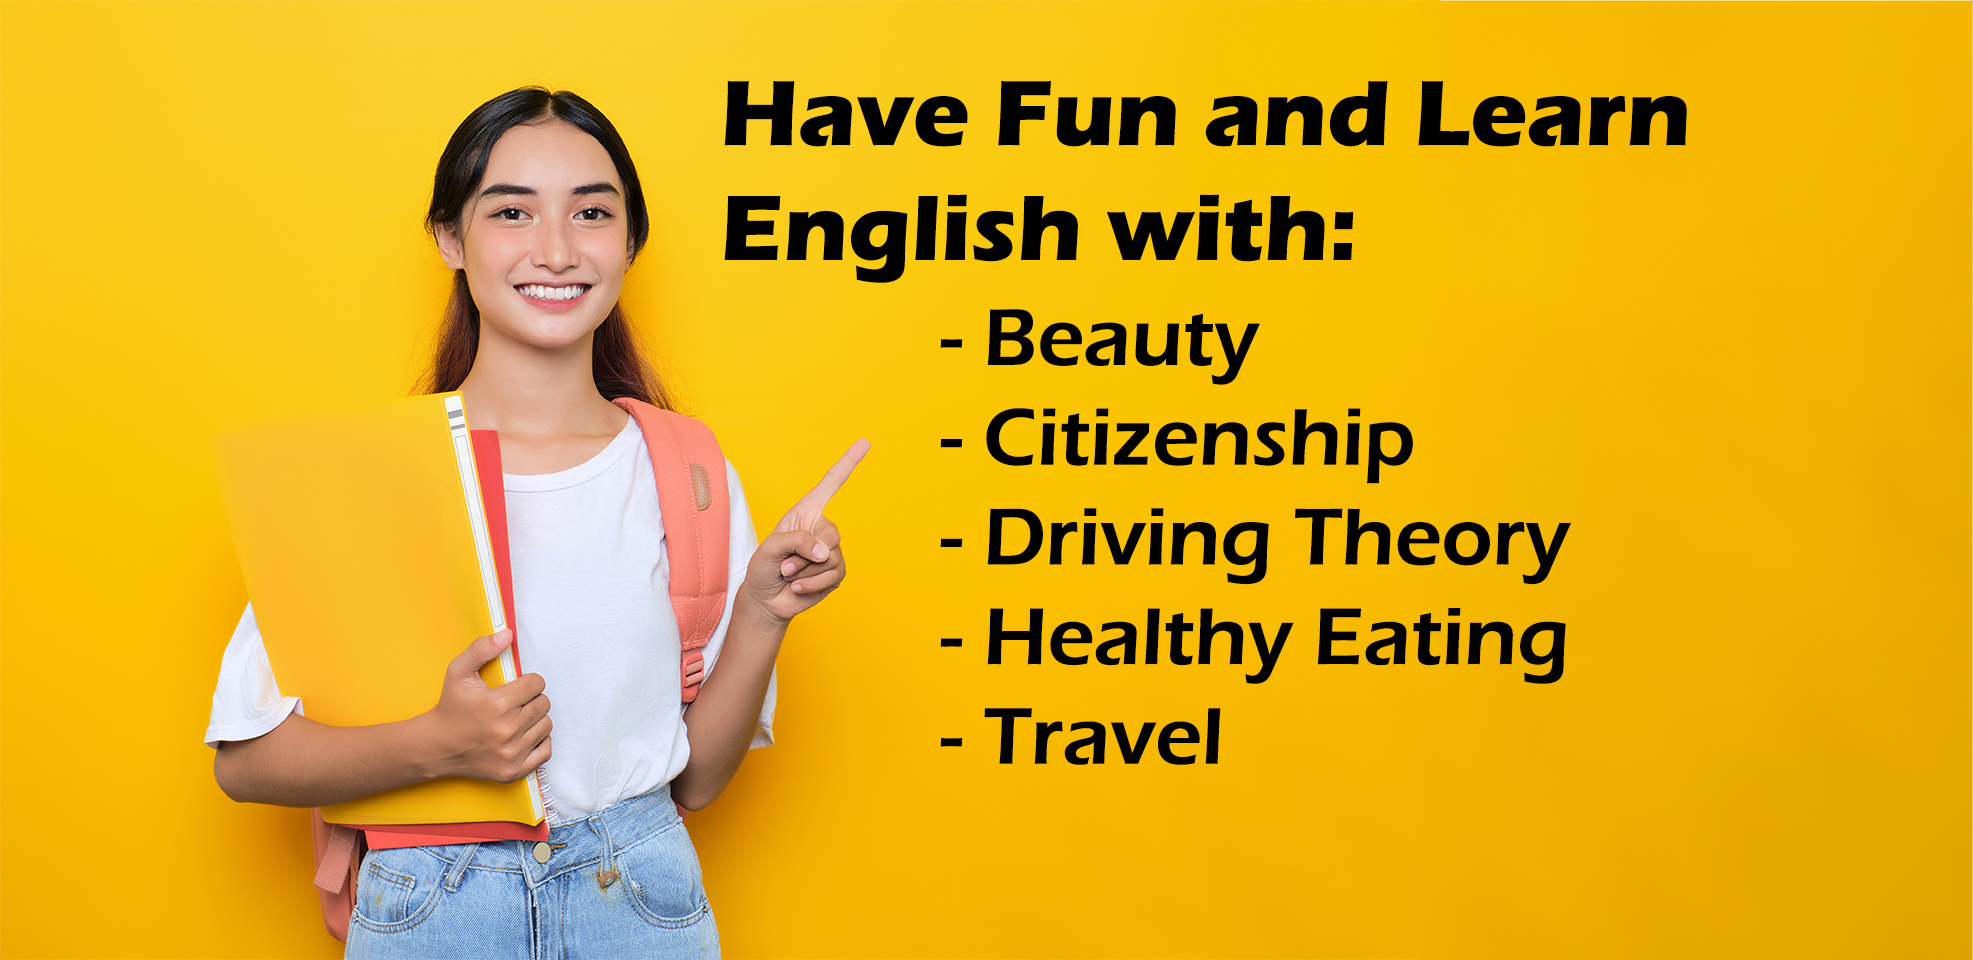 Have Fun and Learn English with:  *Beauty  * Citizenship  *Driving Theory * Healthy Eating * Travel